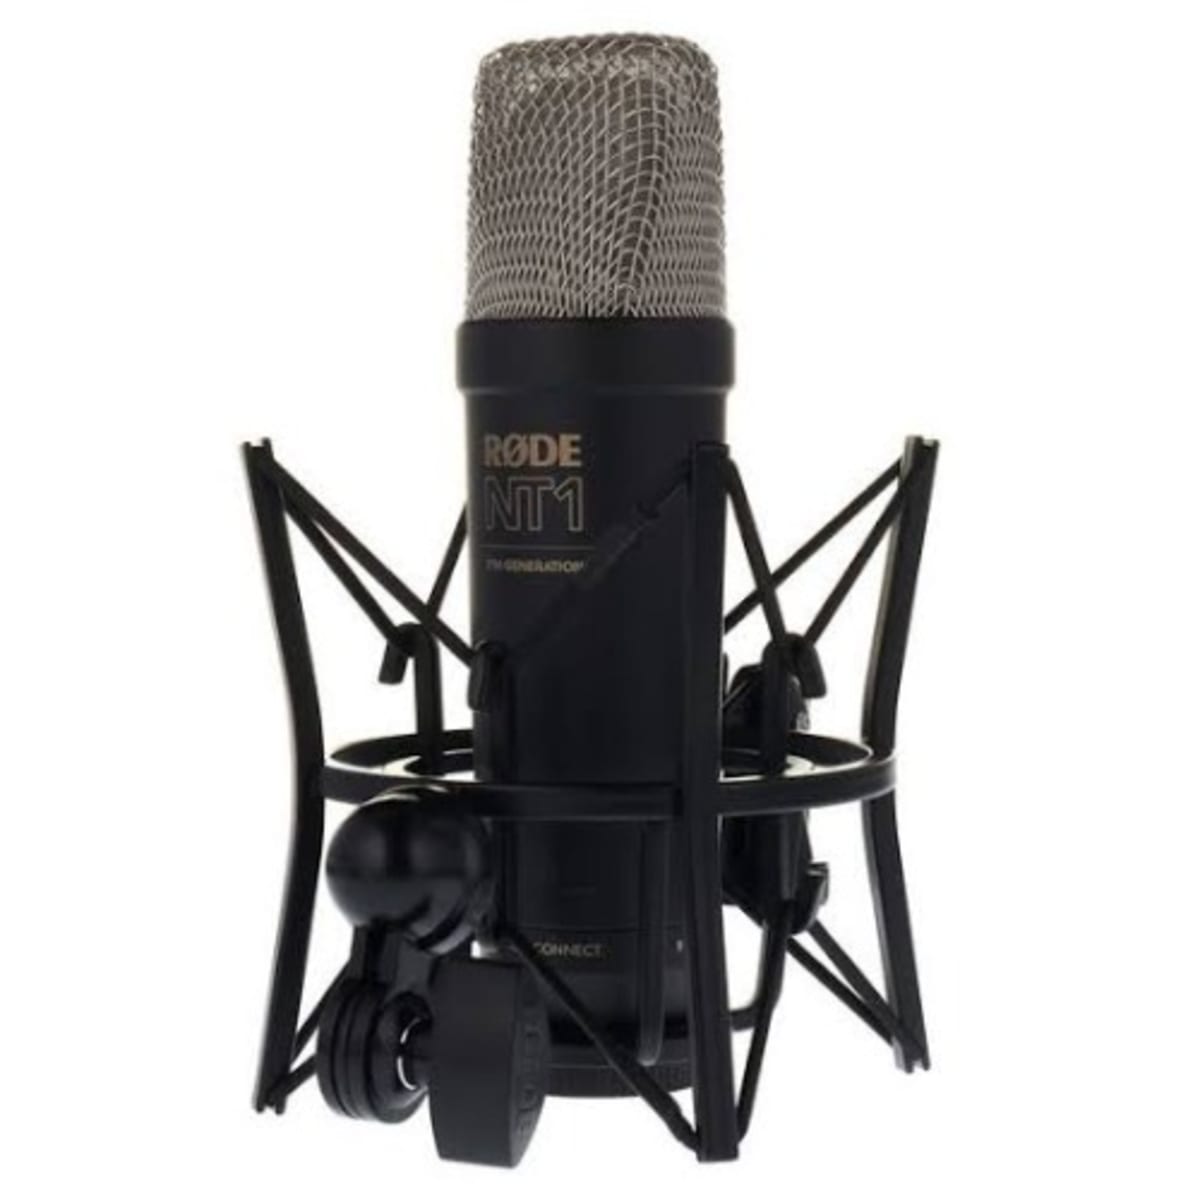 Rode NT1 5th Generation Condenser Microphone with SM6 Shockmount